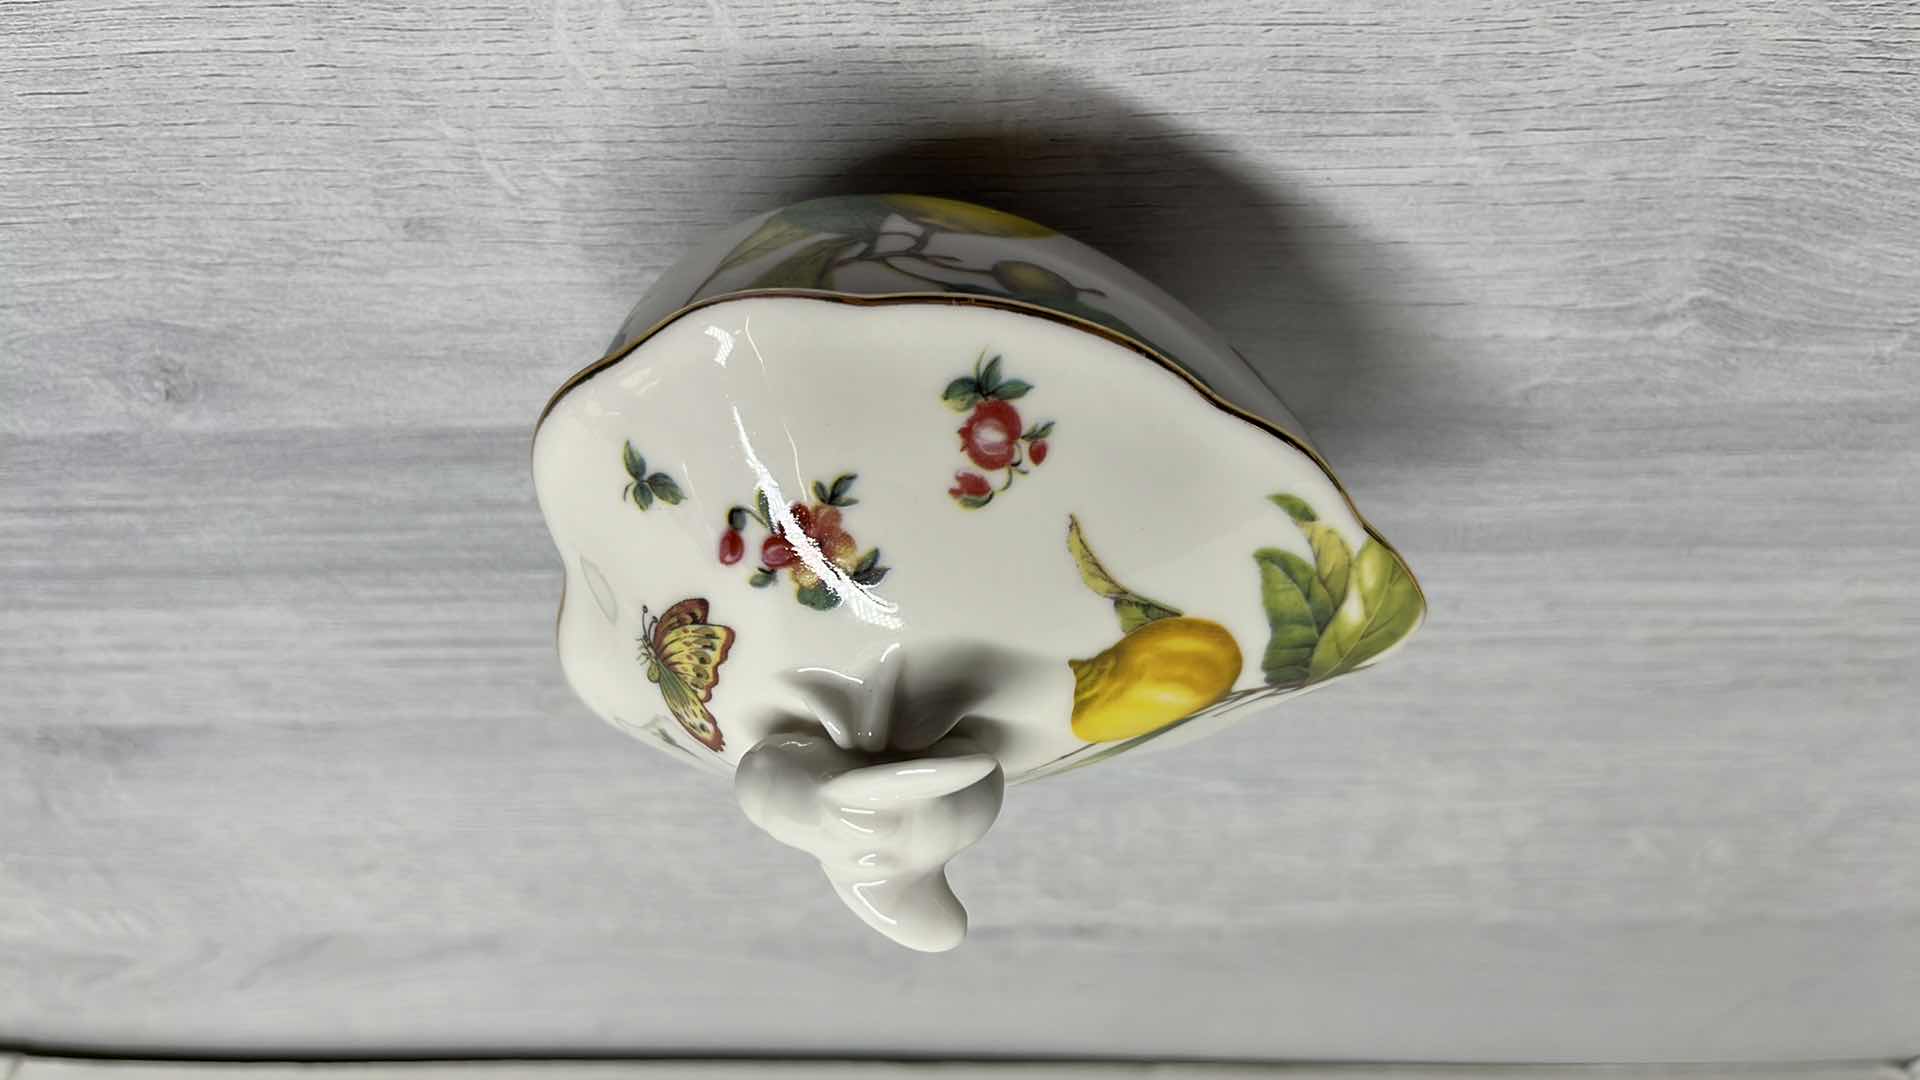 Photo 2 of TANIA BULHOES MARQUESA COLLECTION PORCELAIN BOWL W COVER 3.75” X 4.25” H4” 